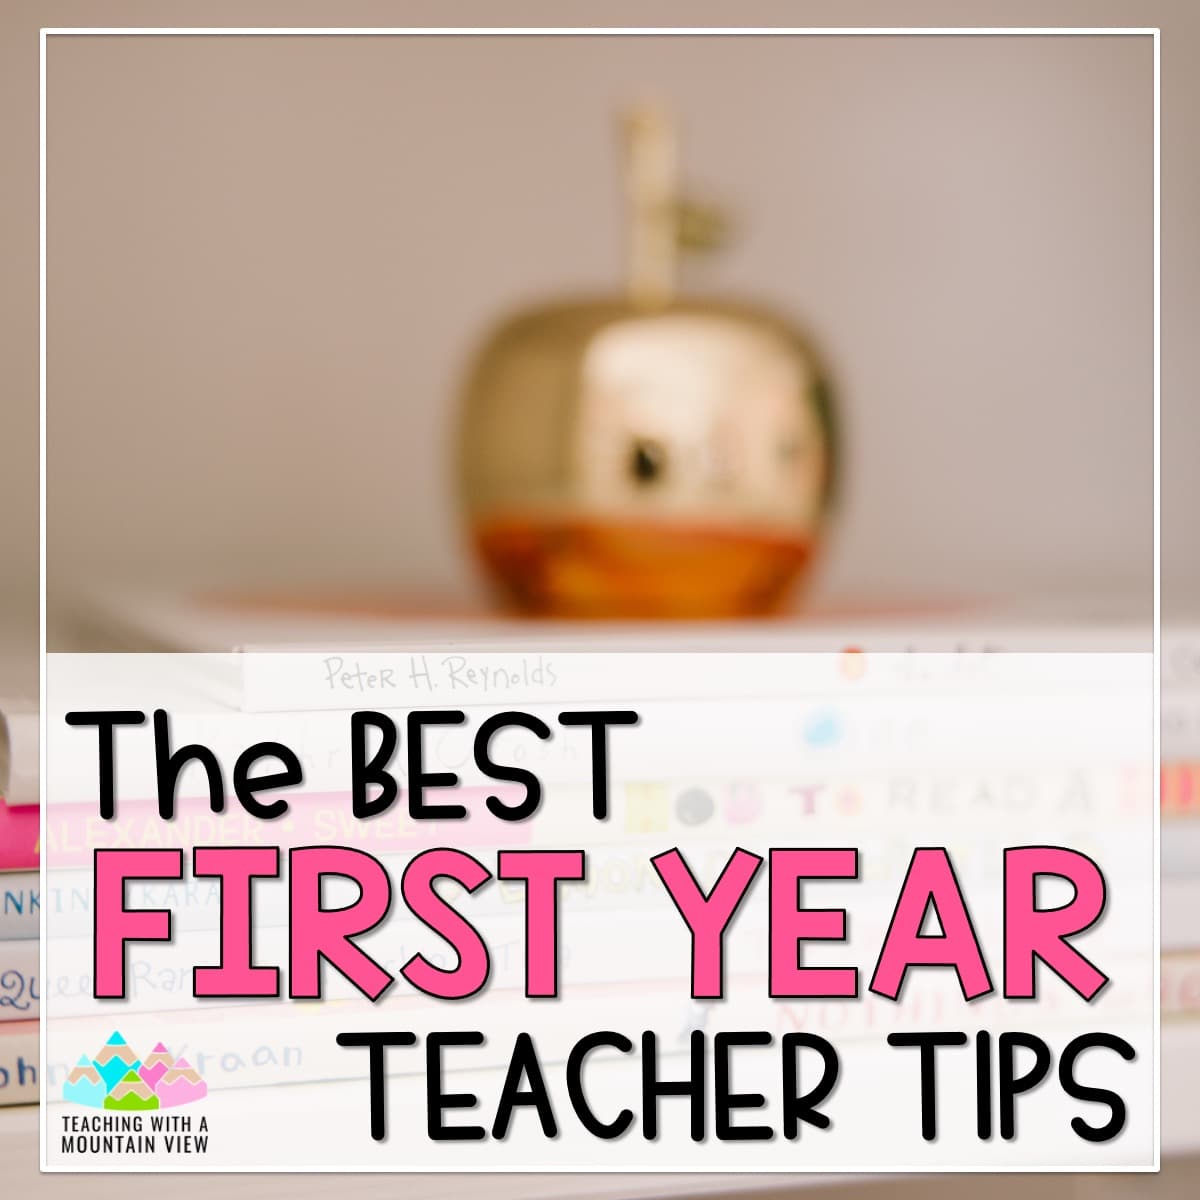 Read our first year teacher tips and learn everything we WISH we had known! We'll cover classroom management, lesson planning, parent communication, and more.